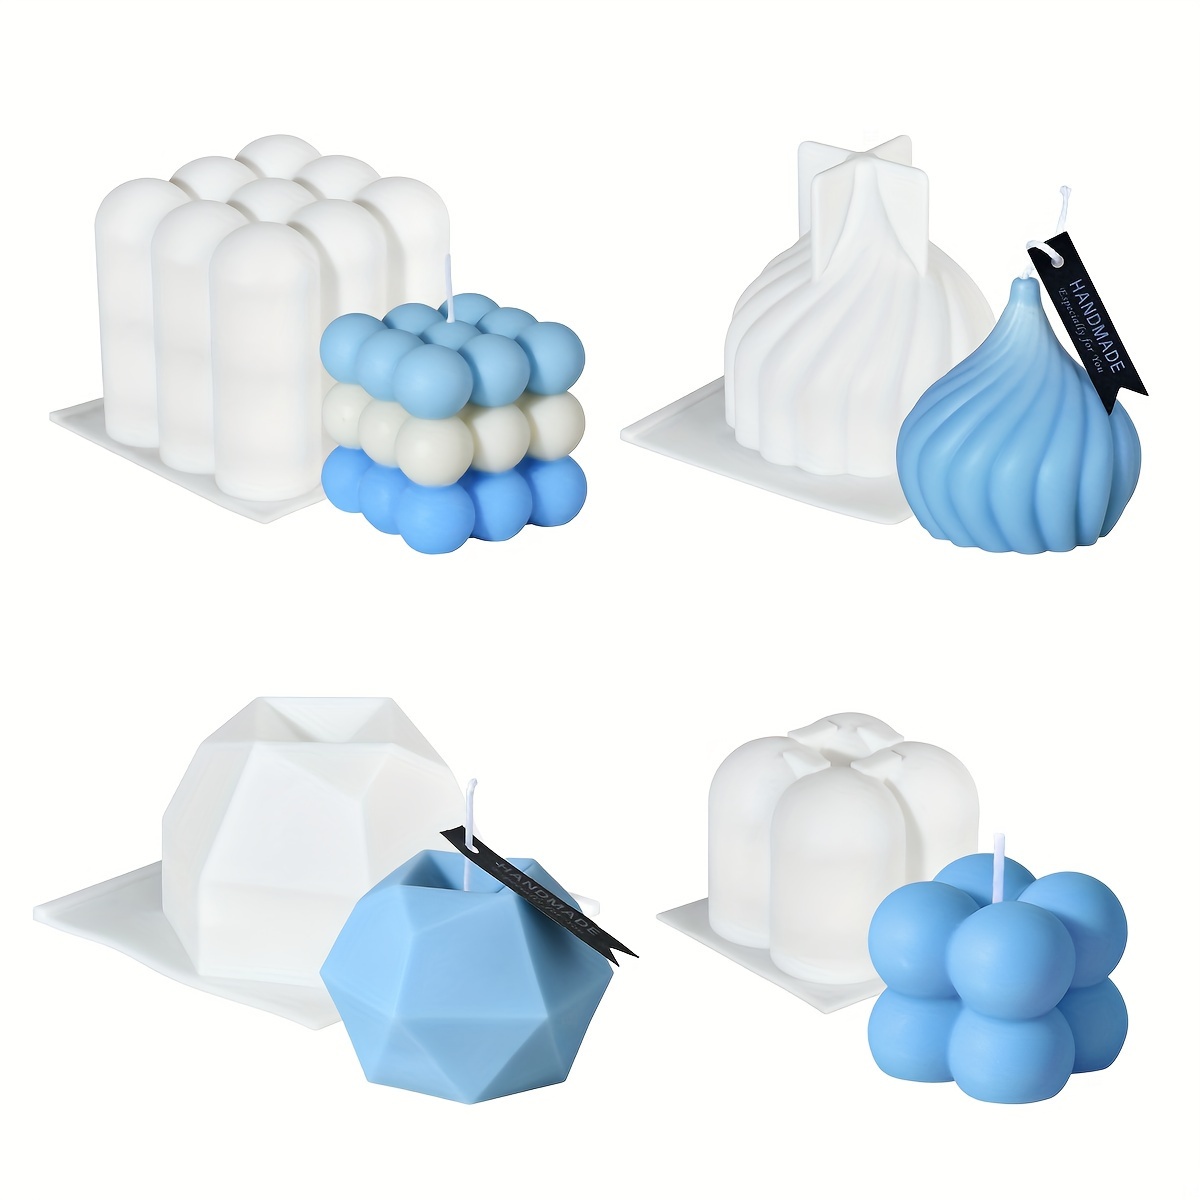 

4-piece Silicone Bubble Cube Mold Set For Candle Making, 3d Bubble Design, Perfect For Soy Wax, Soap & Diy Scented Candles